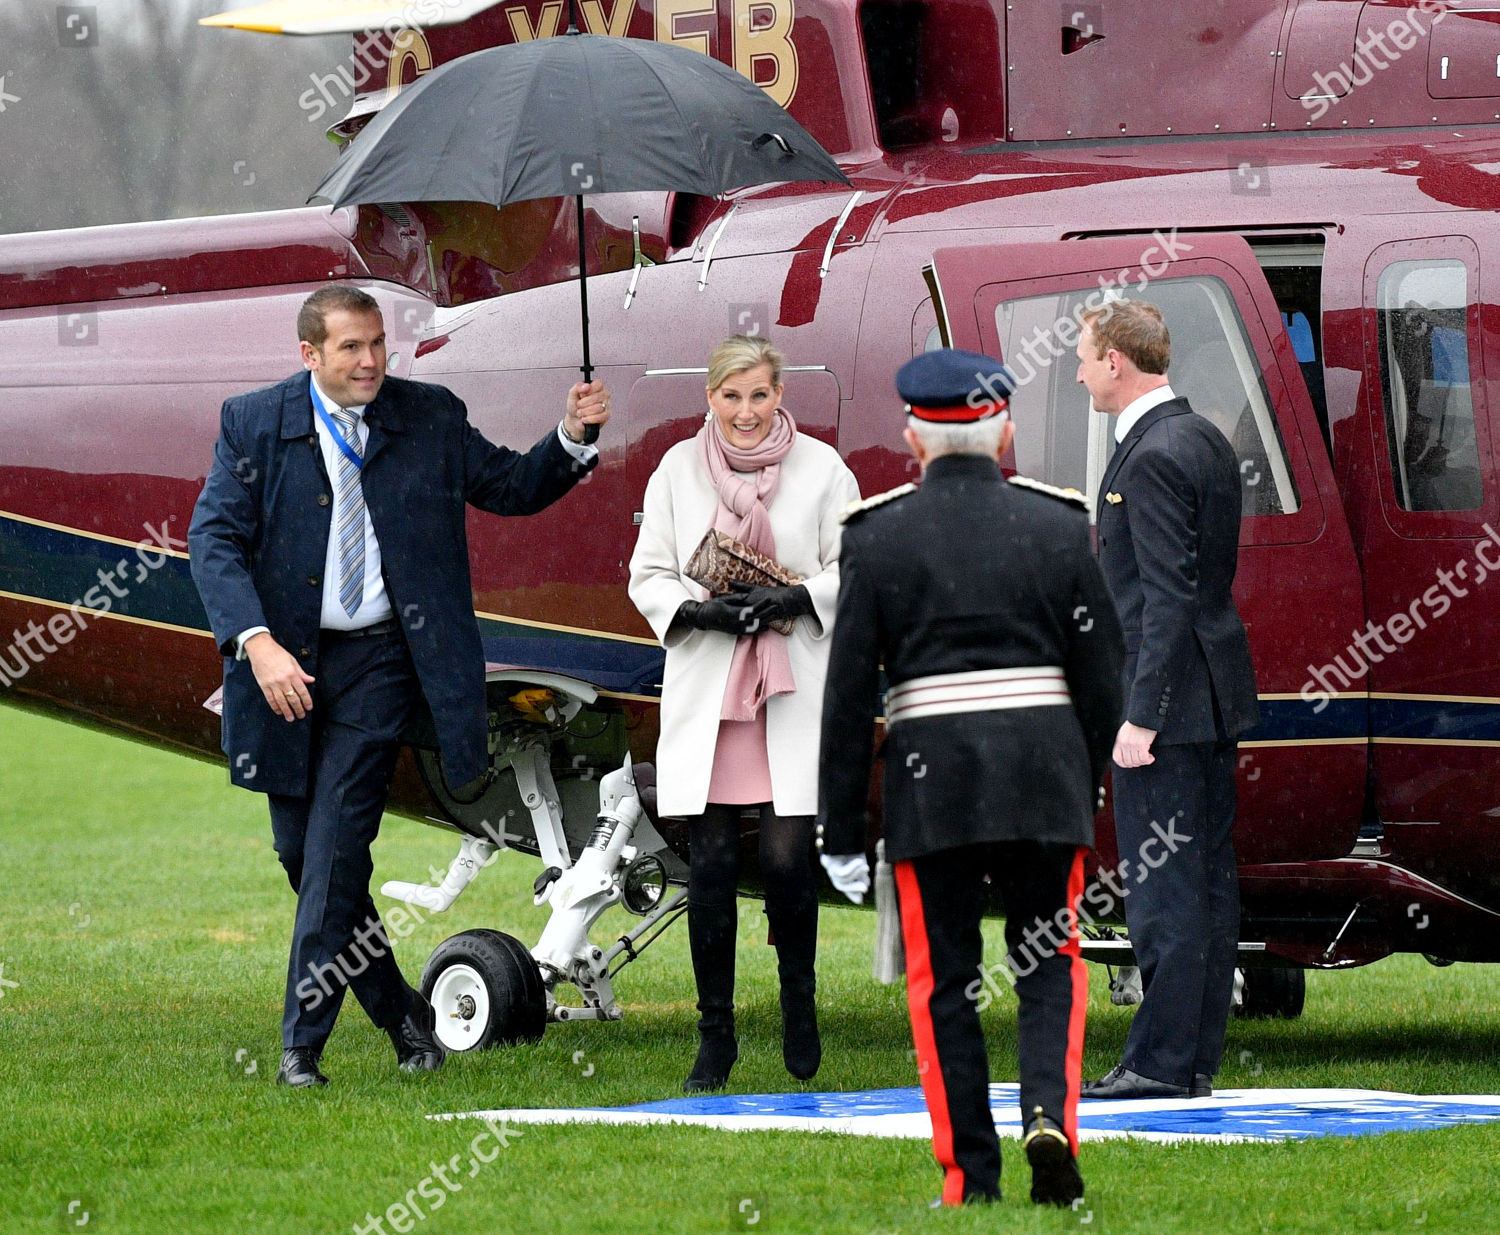 sophie-countess-of-wessex-visit-to-alfreton-uk-shutterstock-editorial-9988163f.jpg